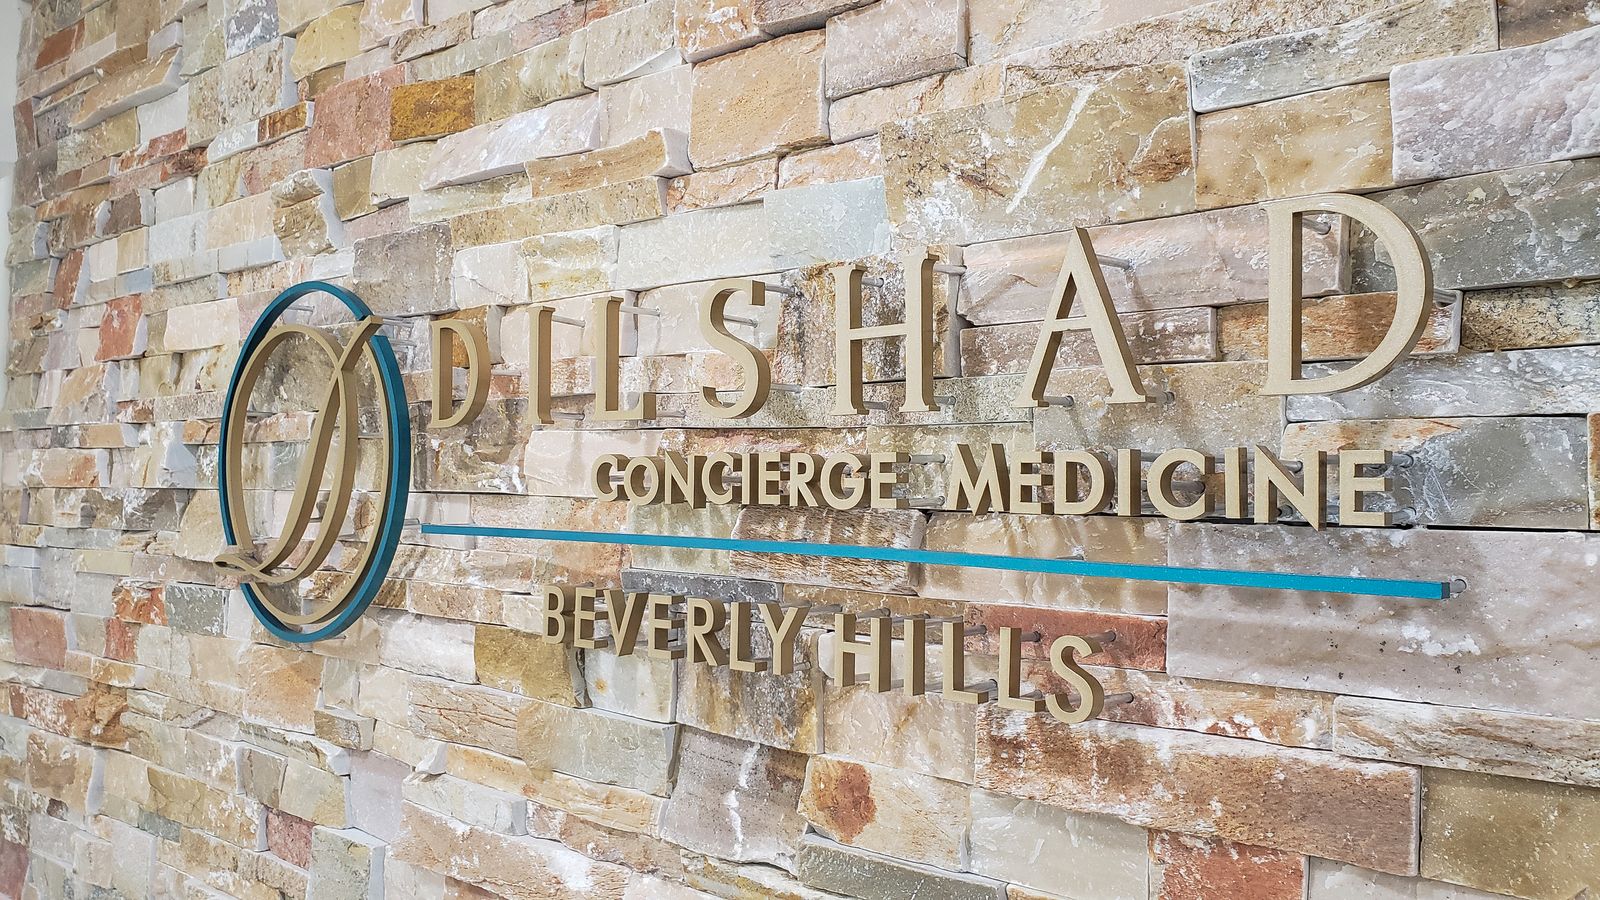 Dilshad Concierge Medicine 3d office sign painted in gold and blue colors made of acrylic